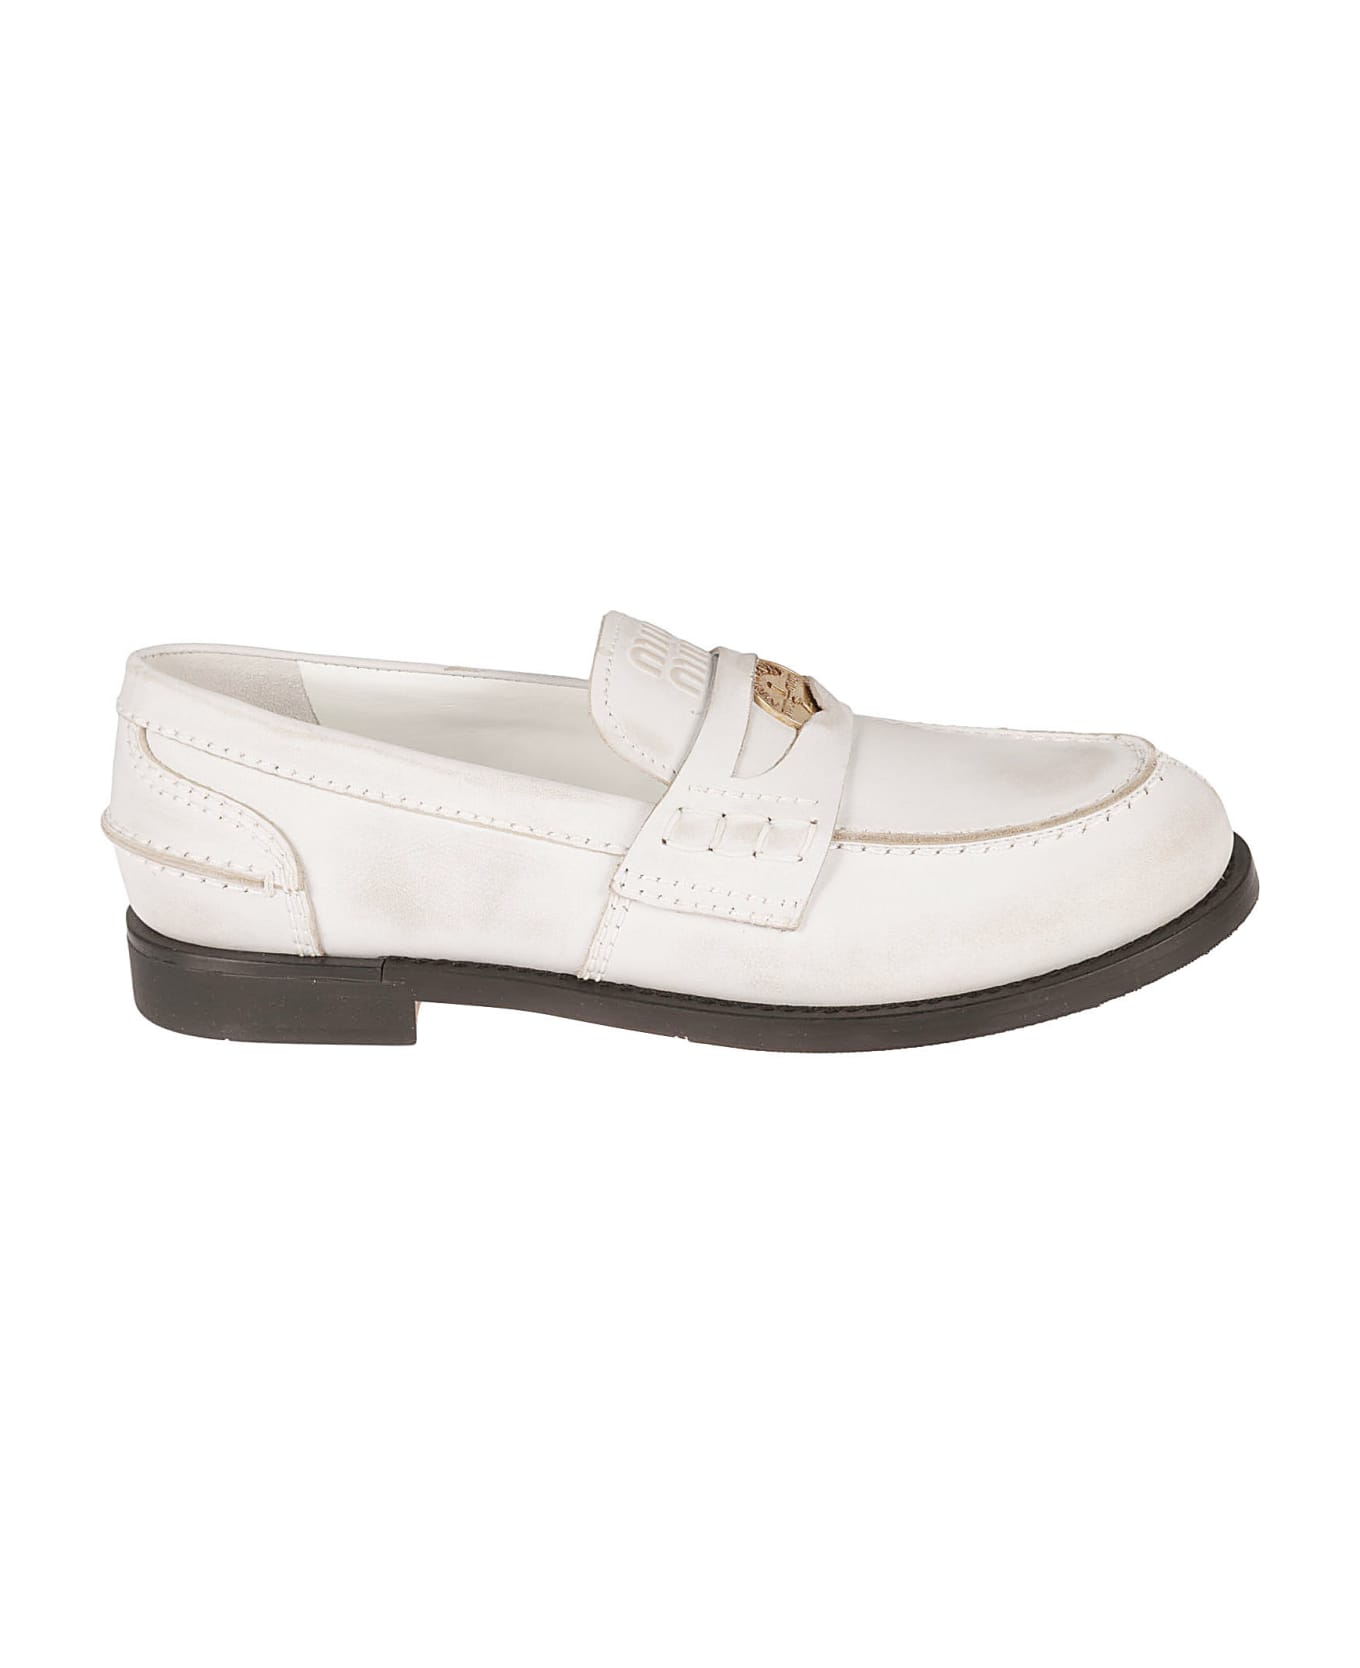 Miu Miu Logo Embossed Coin Applique Loafers - White